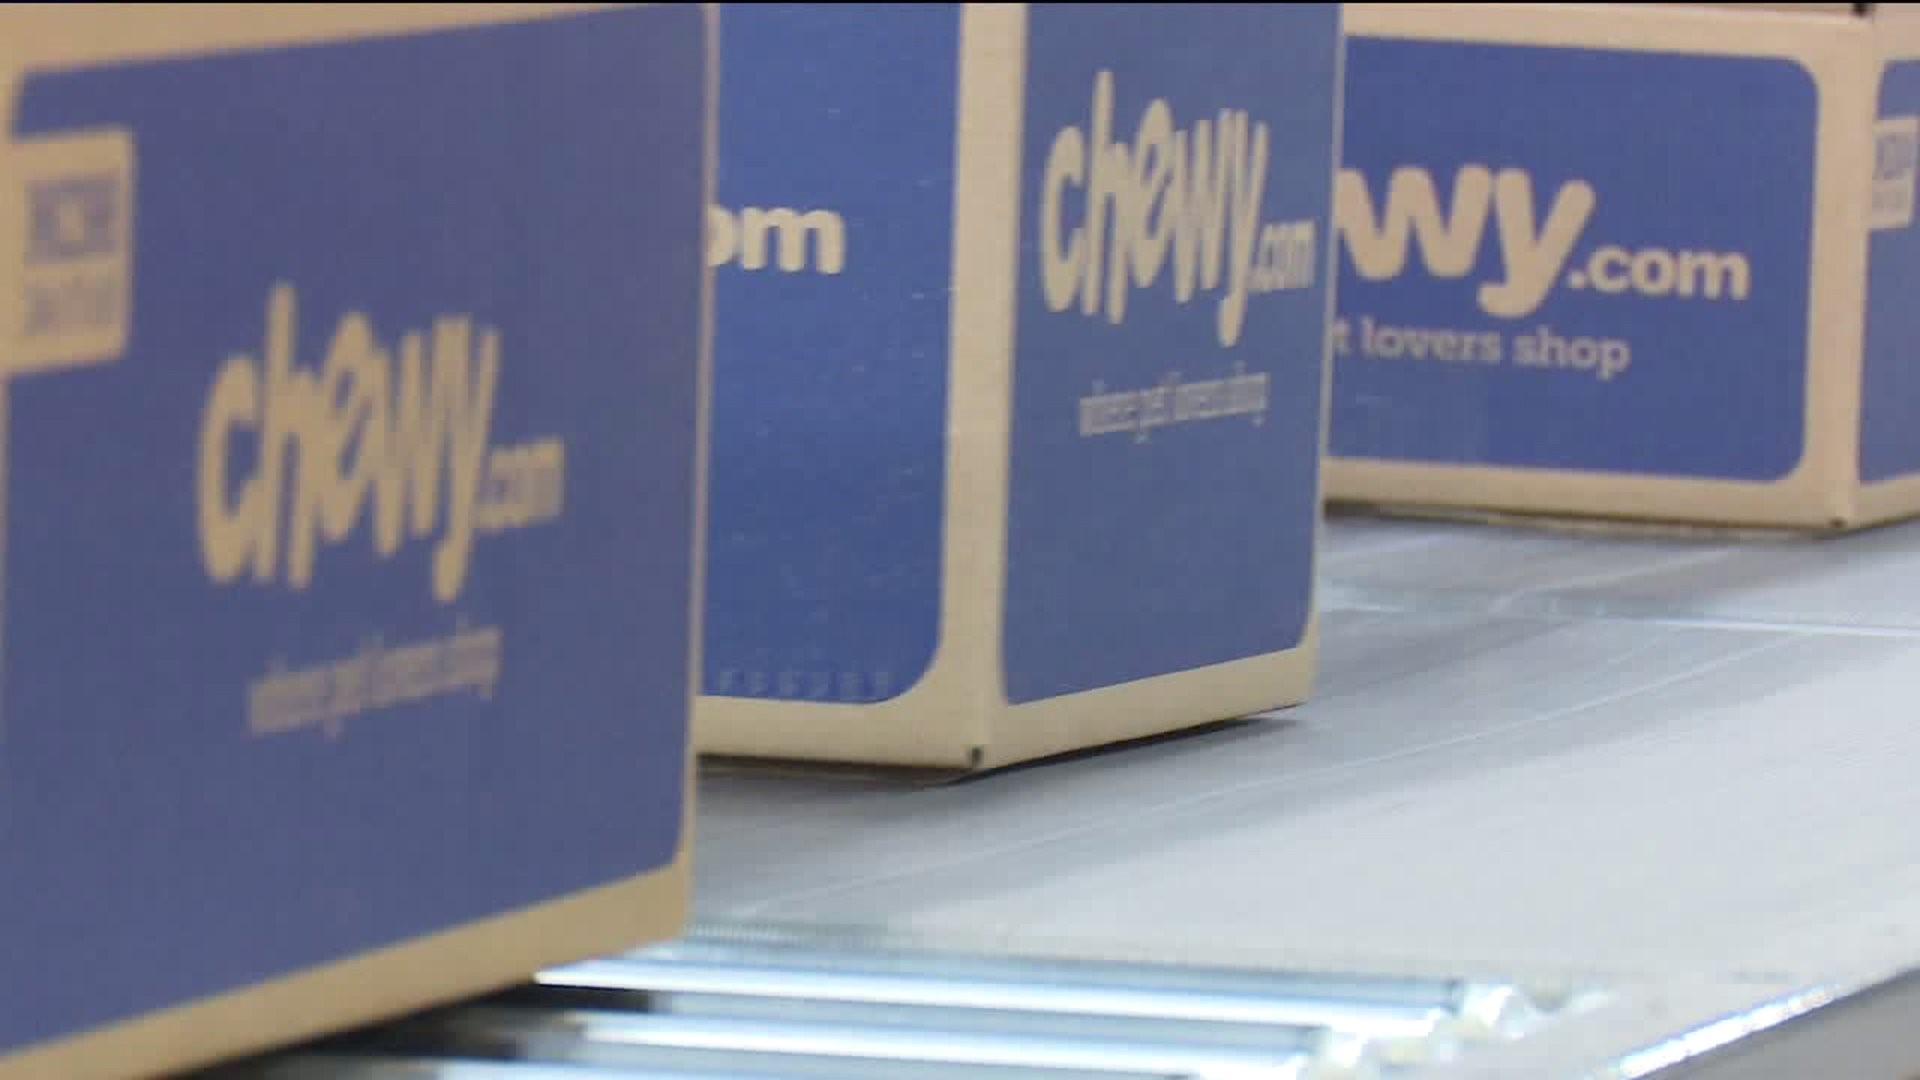 Chewy.com Adding Jobs in Luzerne County